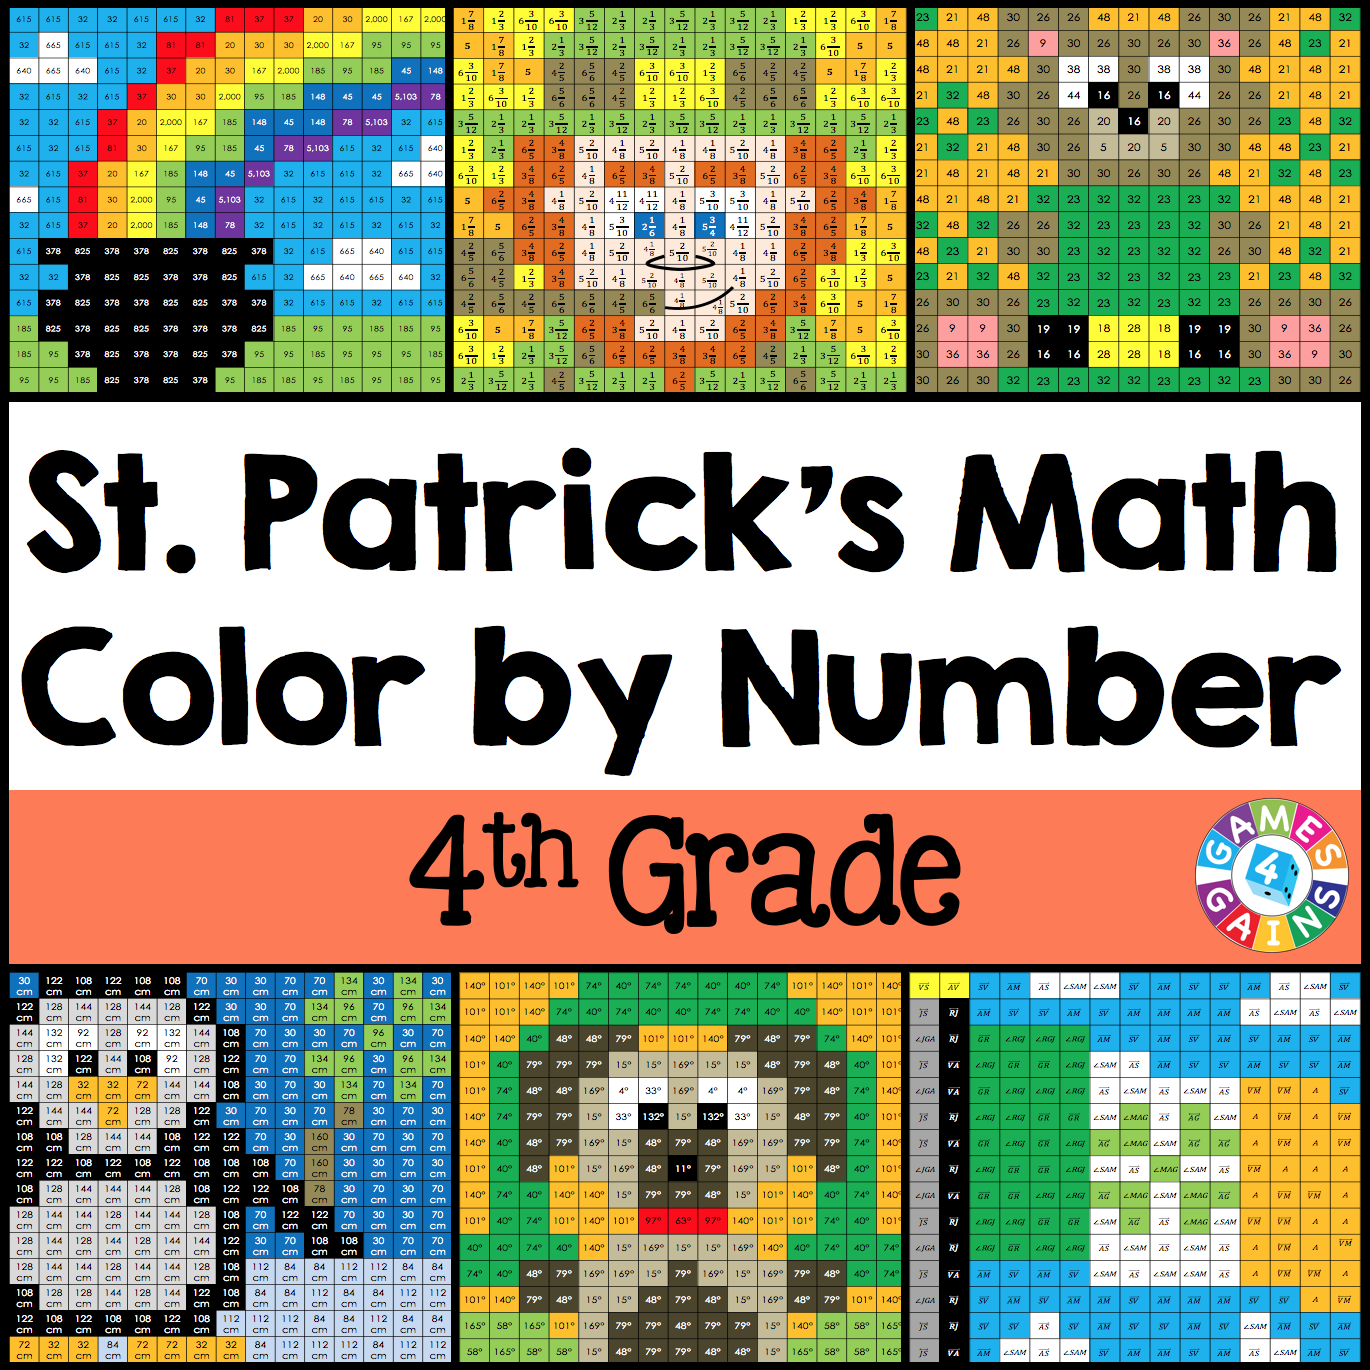 St. Patrick's Day Math 4th Grade Cover.png